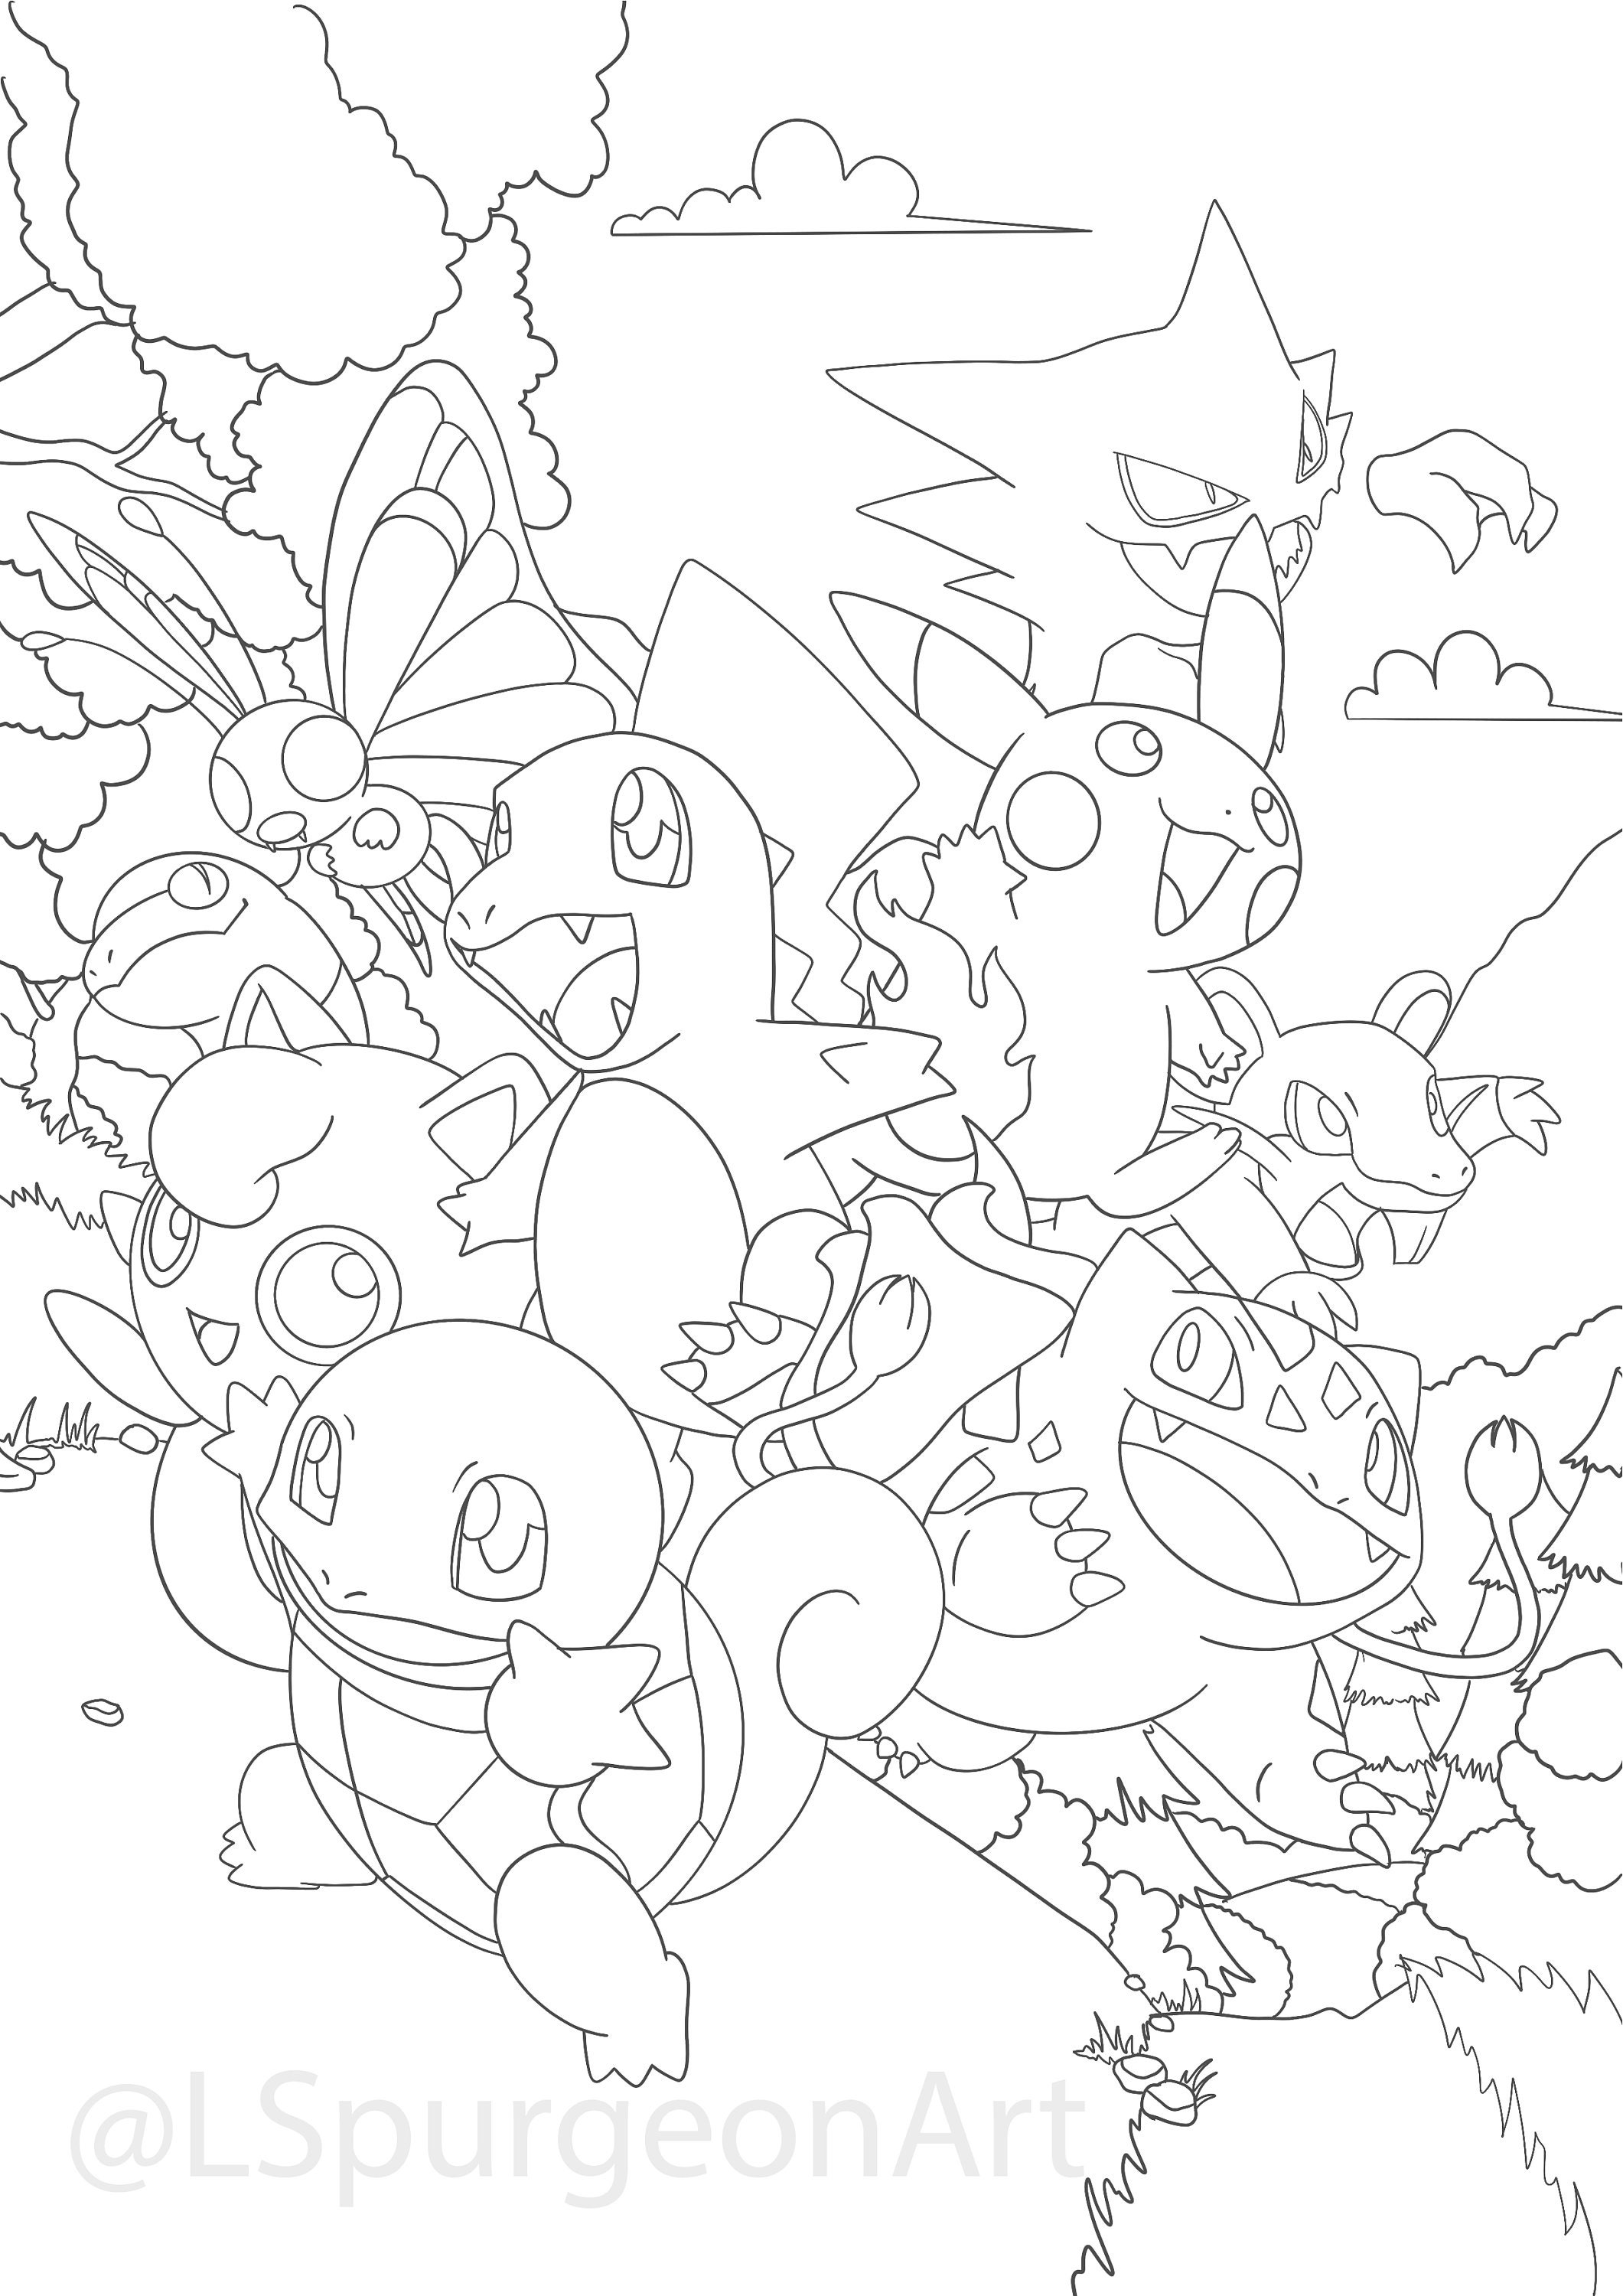 100 Best Pokemon Coloring Pages. Welcome to the vibrant world of